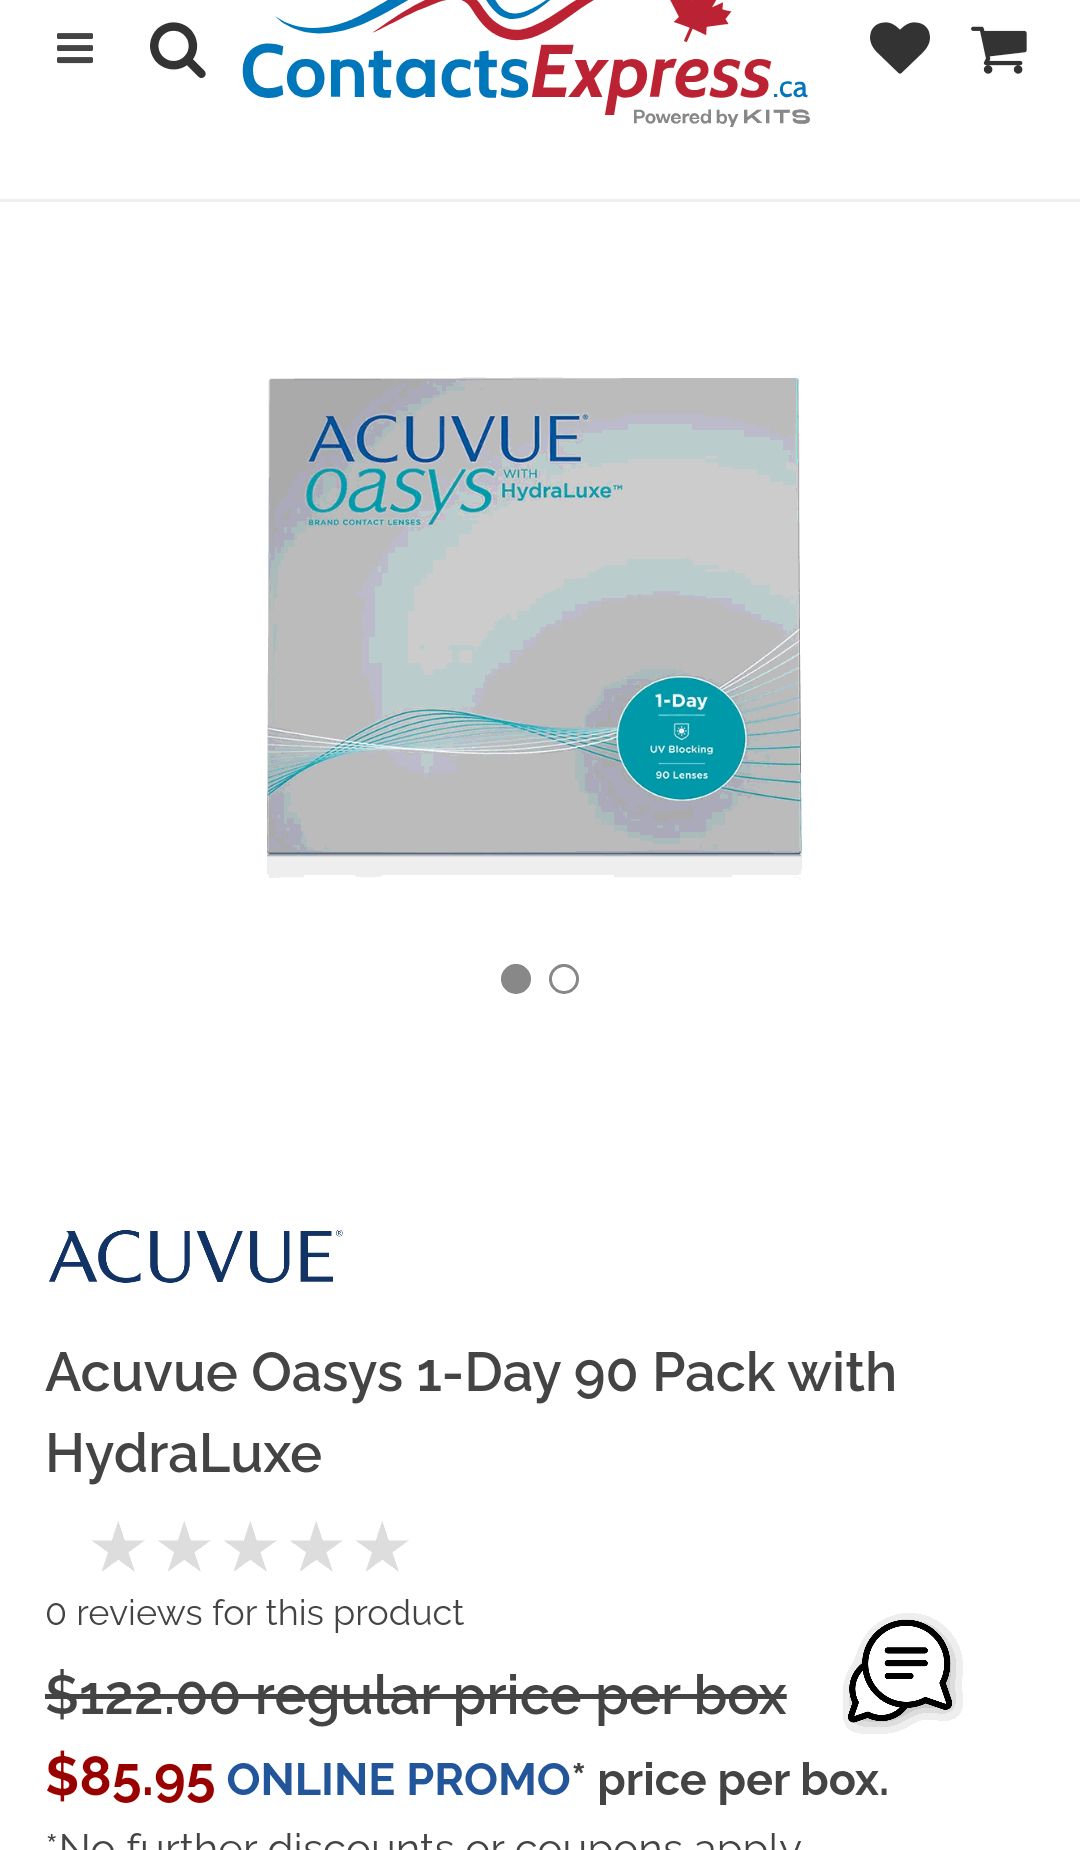 ContactsExpress.ca -- Acuvue Oasys 1-Day 90 Pack with HydraLuxe Contact Lenses